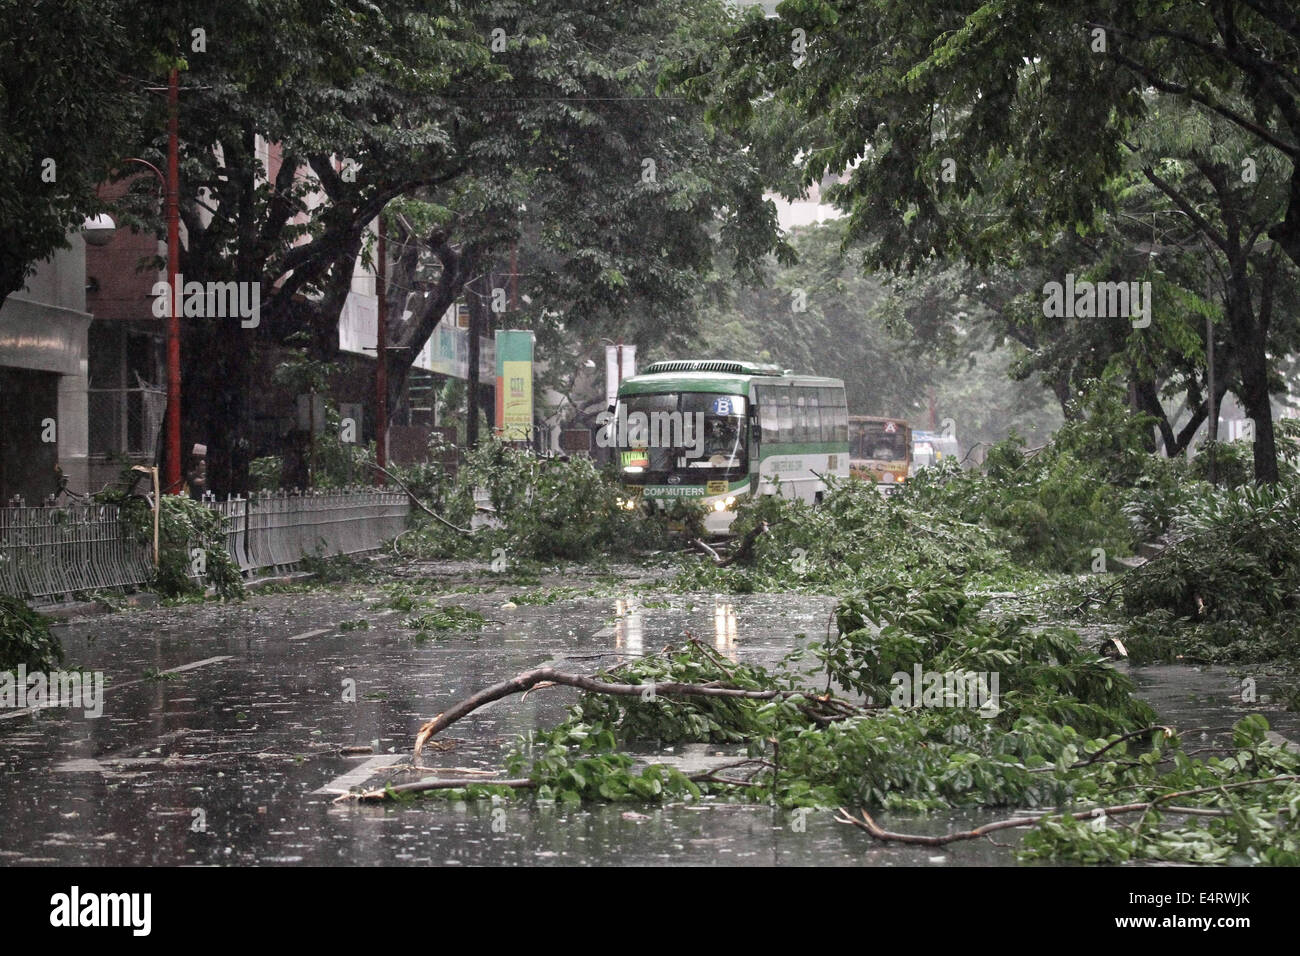 Manila, Philippines. 16th July, 2014. A commuter bus makes its way through debris brought down by Typhoon Rammasun on July 16, 2014. Typhoon Rammasun (locally known as Glenda) had maximum sustained winds of 150 kph and gustiness of up to 185 kph when it hit Metro Manila. Across the country, about 400,000 people had fled their homes and sheltered in evacuation centers, according to the disaster management council. Credit:  ZUMA Press, Inc./Alamy Live News Stock Photo